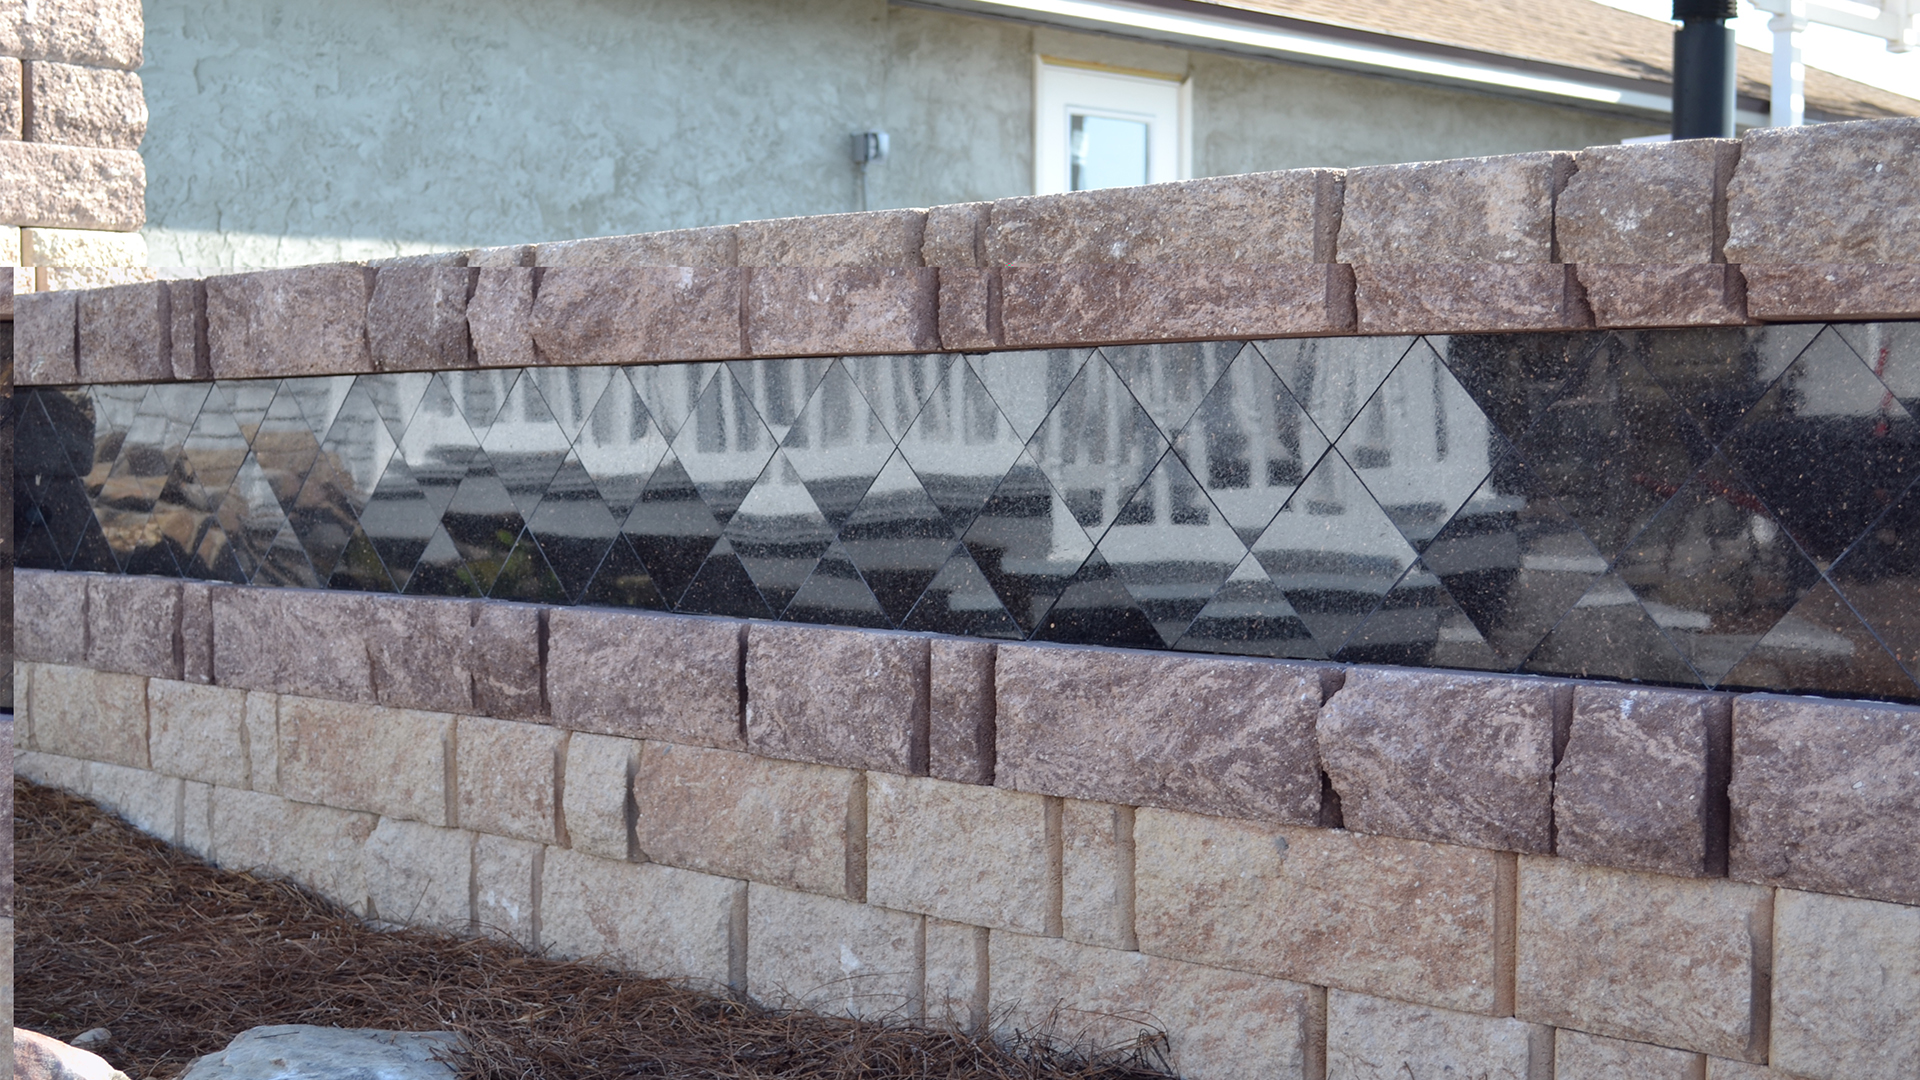 Danielle Fence & Outdoor Living | Danielle Fence Showroom - Stonegate Wall